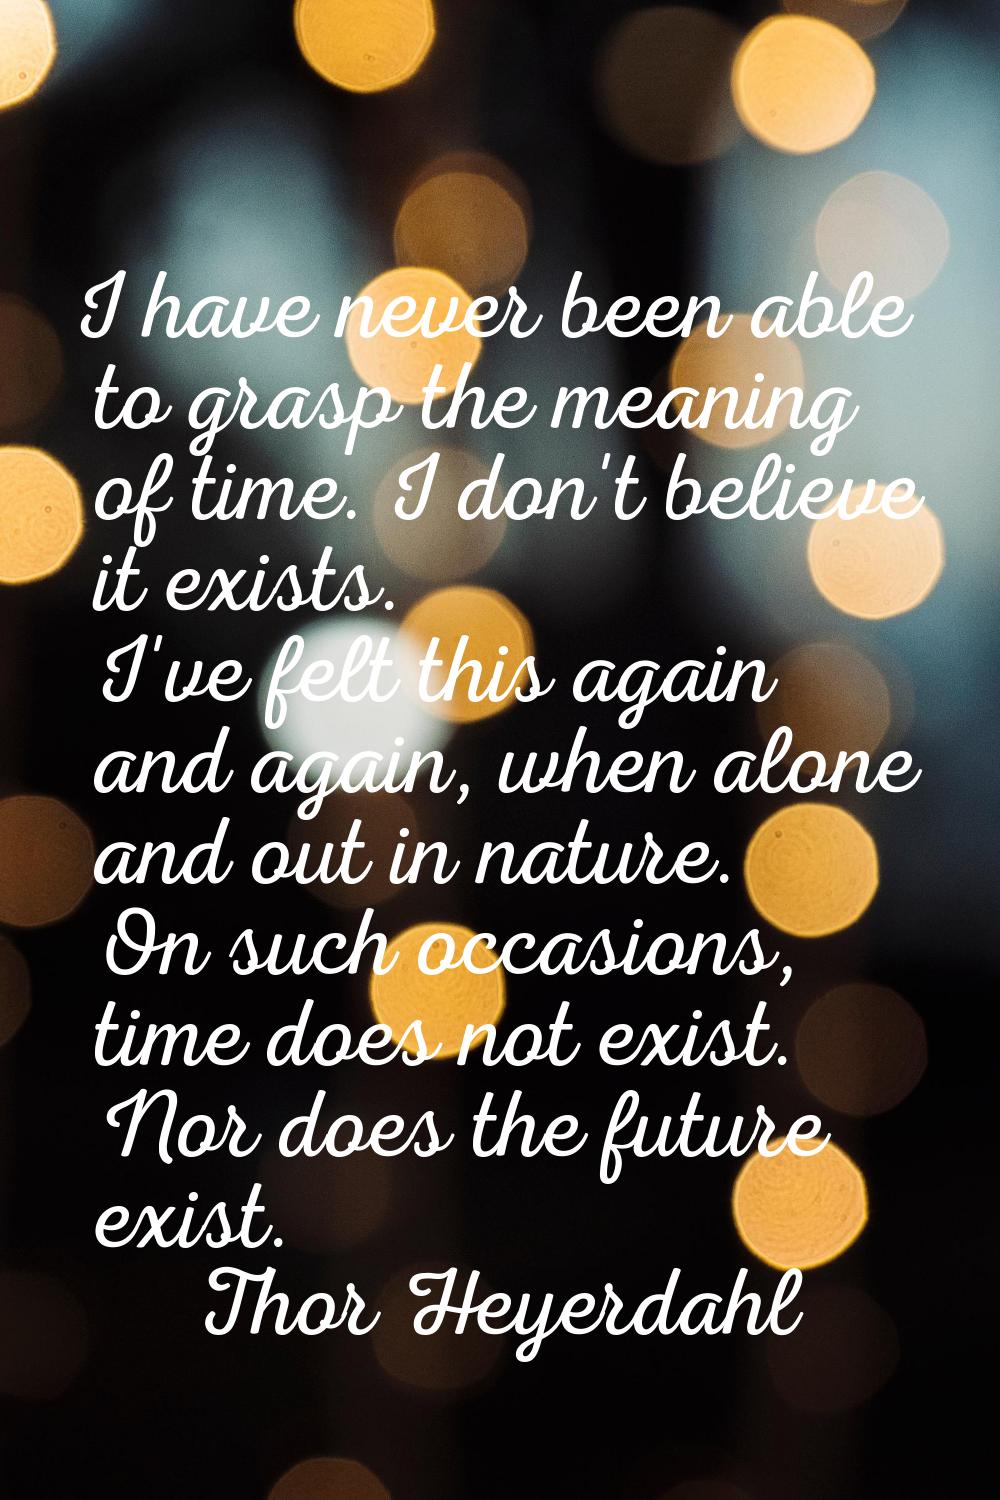 I have never been able to grasp the meaning of time. I don't believe it exists. I've felt this agai